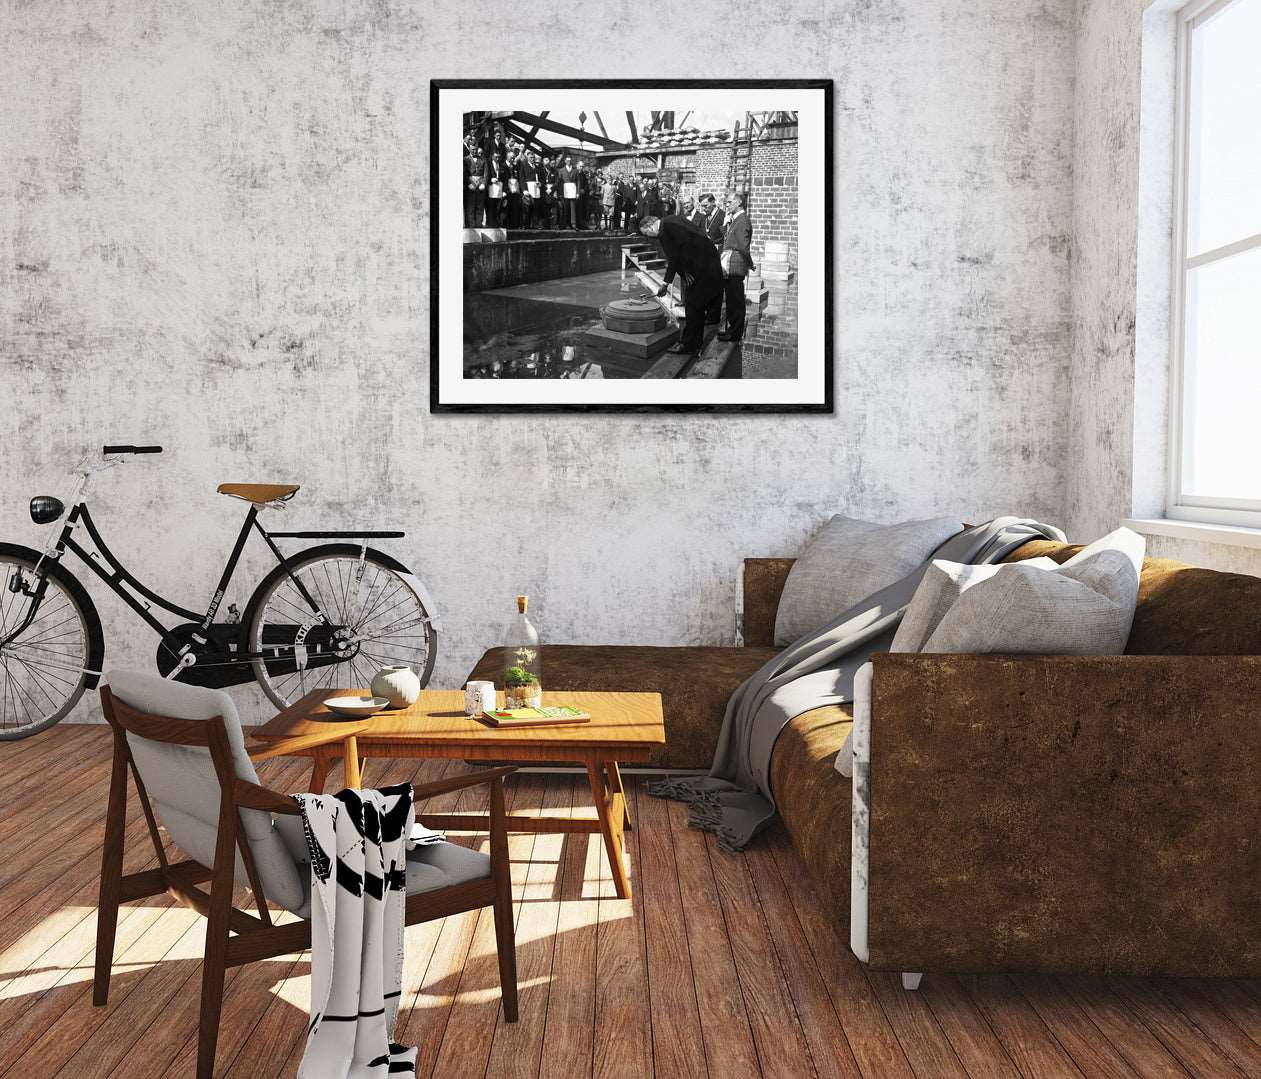 A modern living room with rustic decor and a framed paper print of a vintage photograph